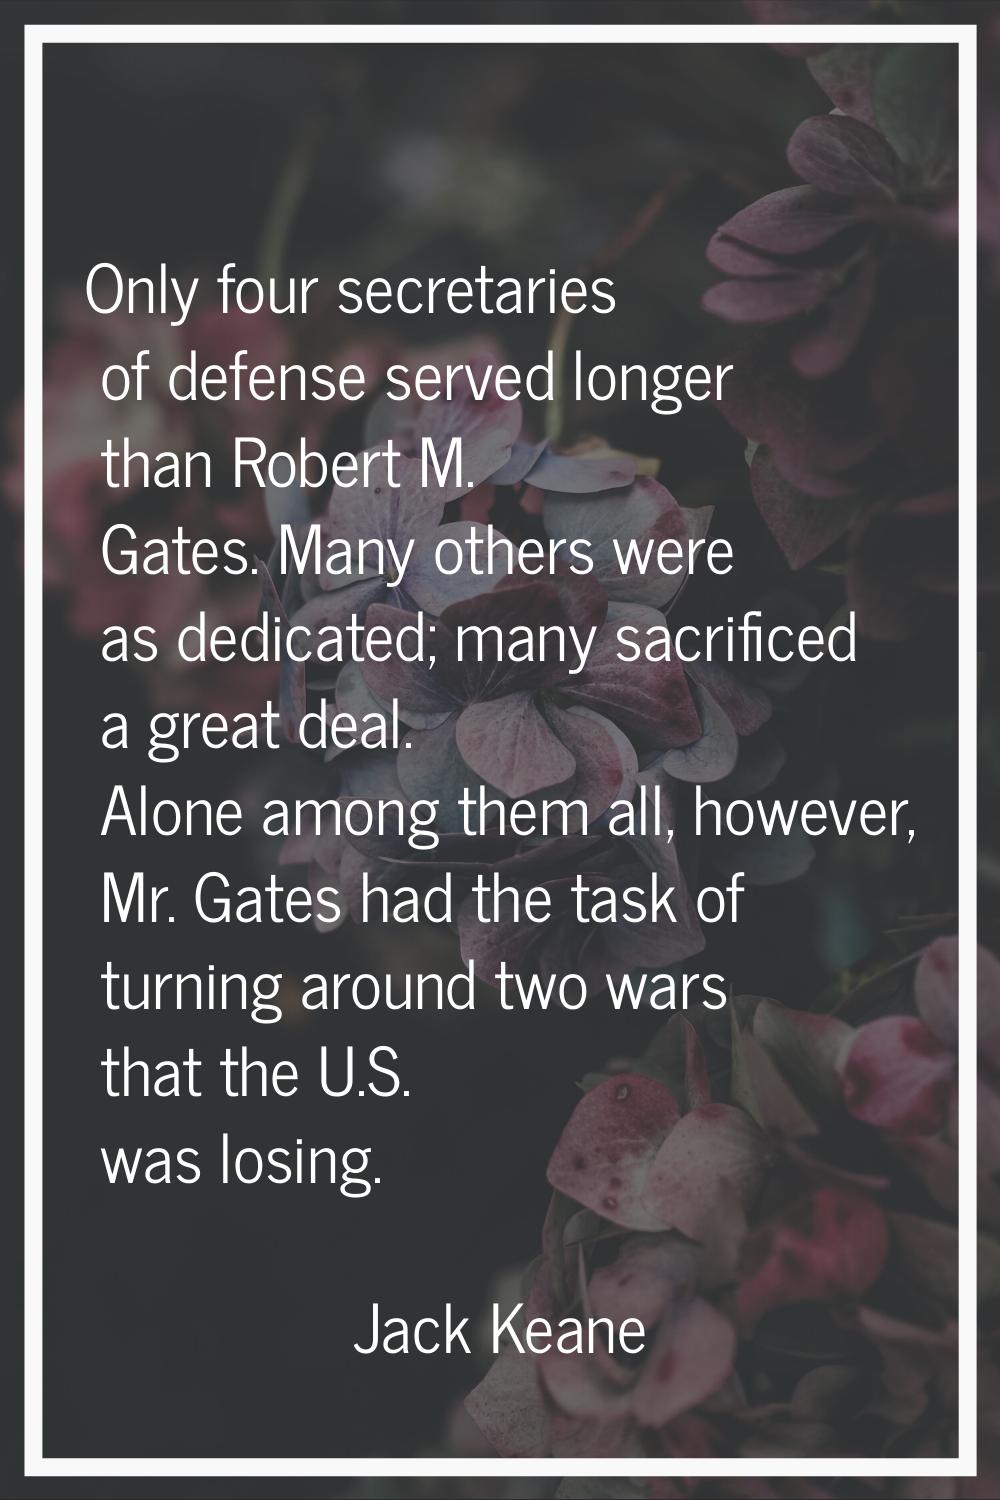 Only four secretaries of defense served longer than Robert M. Gates. Many others were as dedicated;